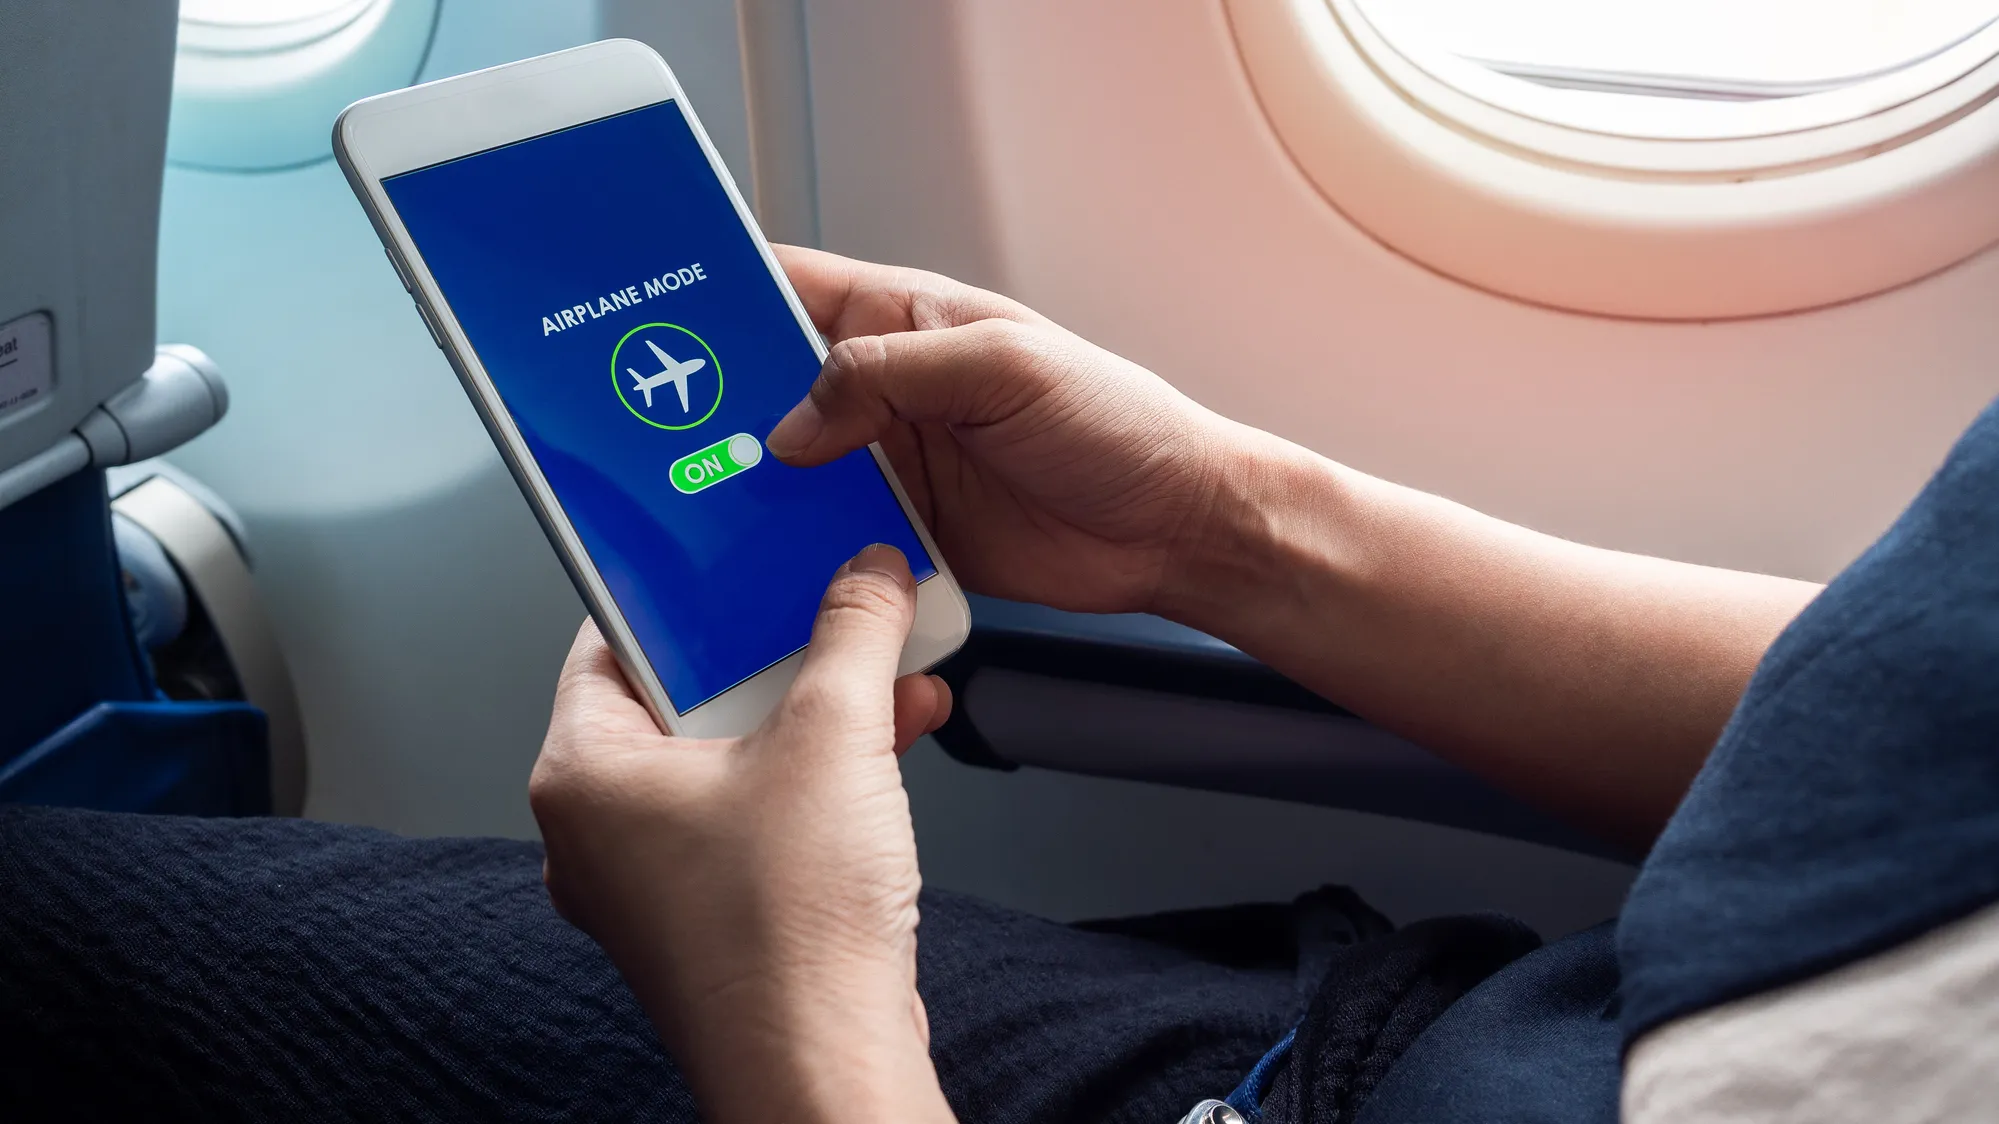 Google Develops Android Feature Enabling Airplane Mode During Flight